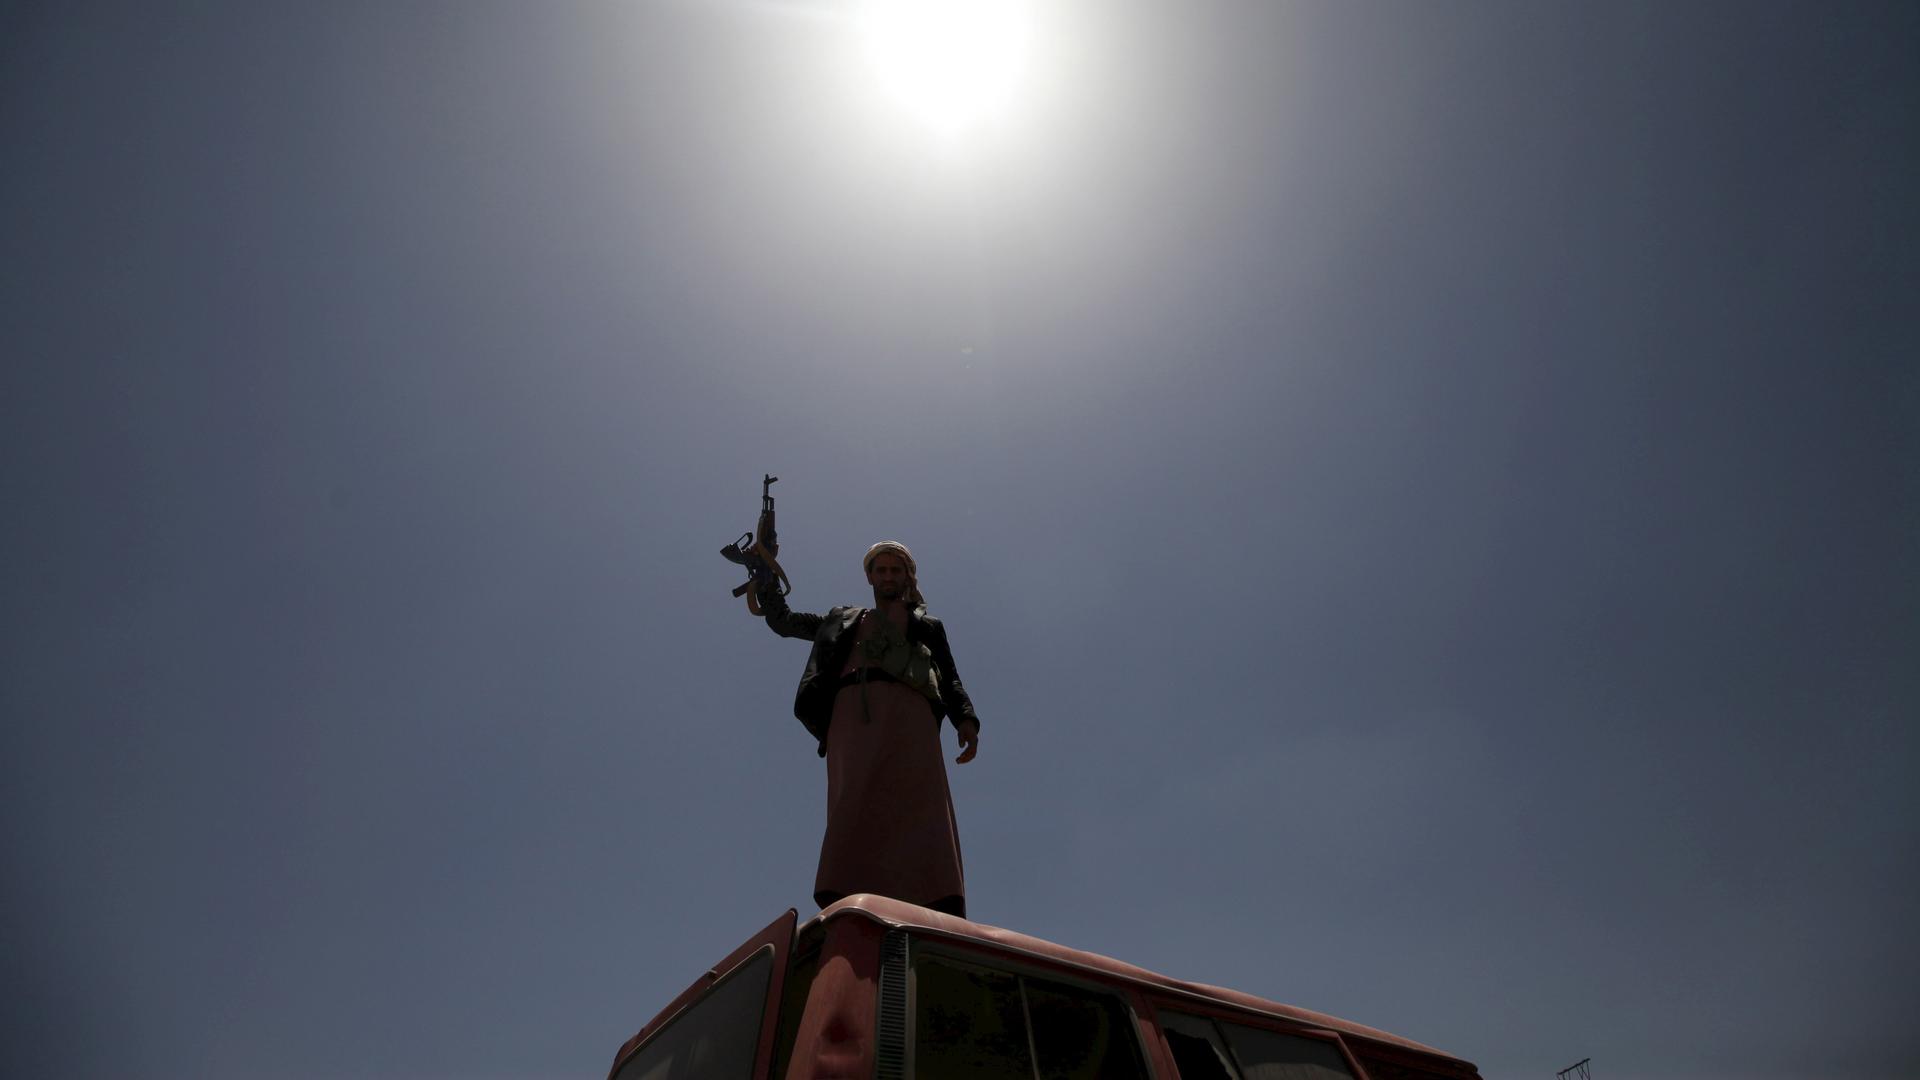 A follower of the Houthi group raises his weapon as he stands on a vehicle on a damaged street in Sanaa on April 21, 2015.